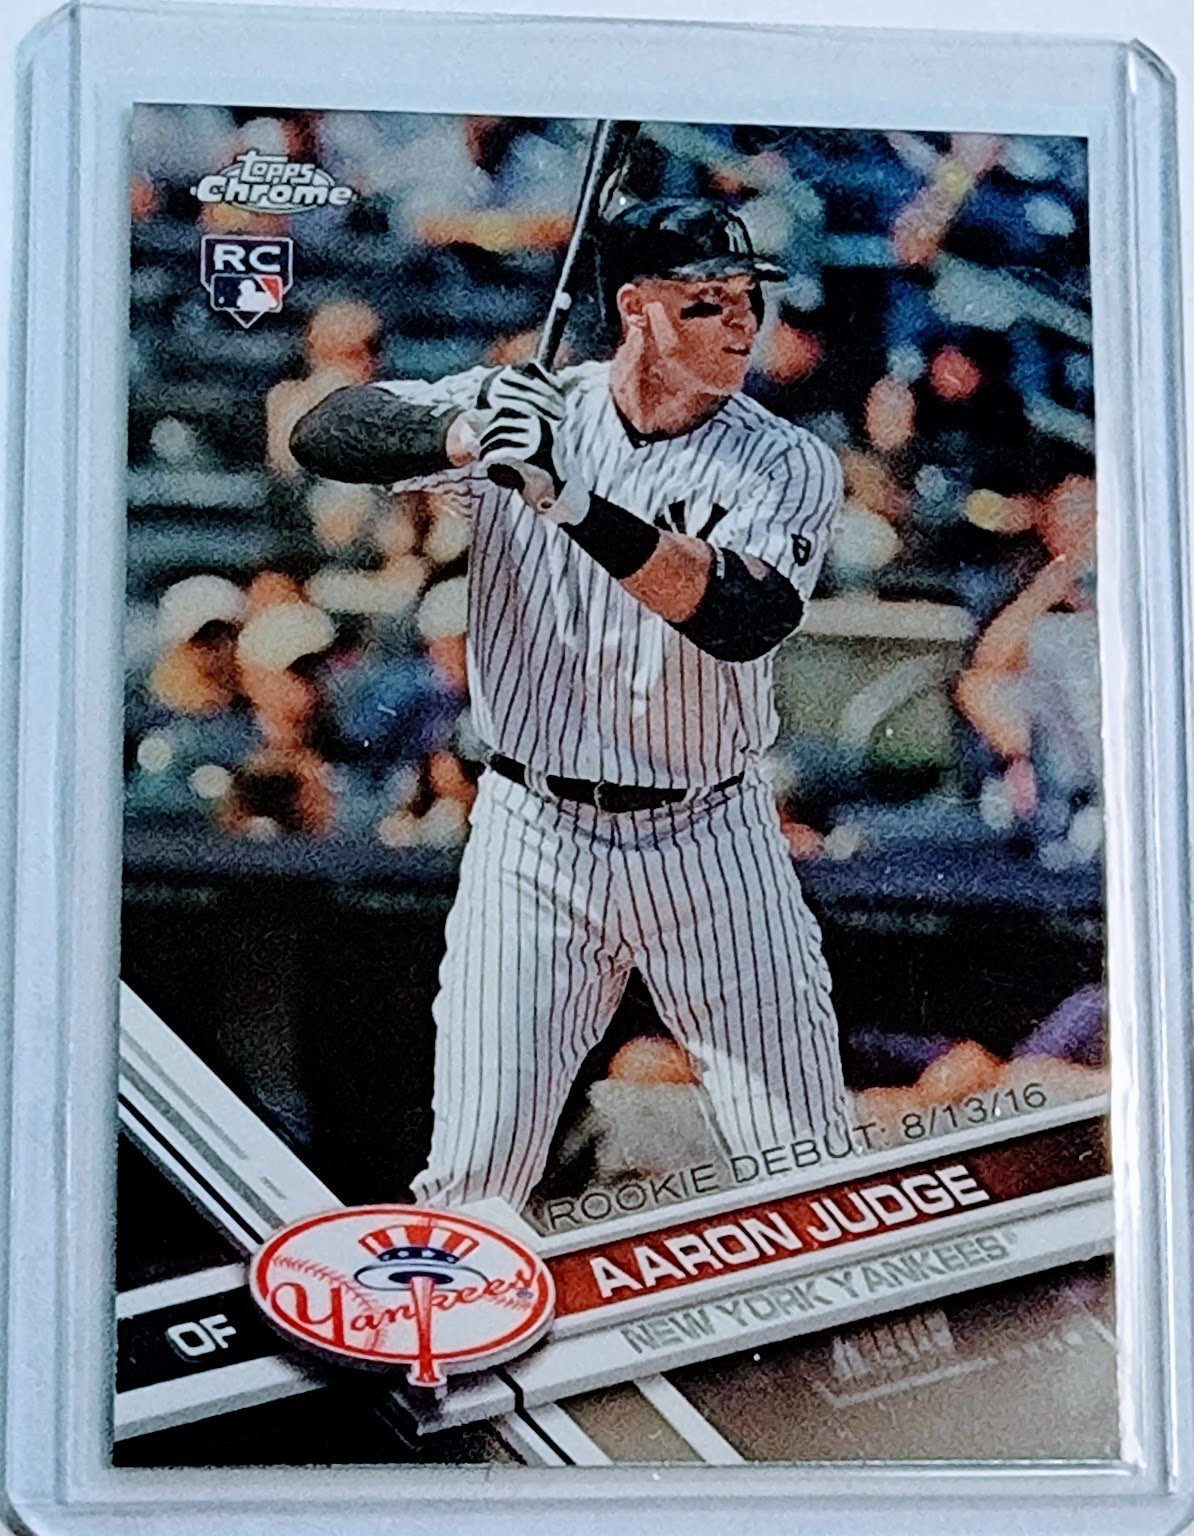 2017 Topps Chrome Update Aaron Judge Rookie Debut Baseball Card TPTV simple Xclusive Collectibles   